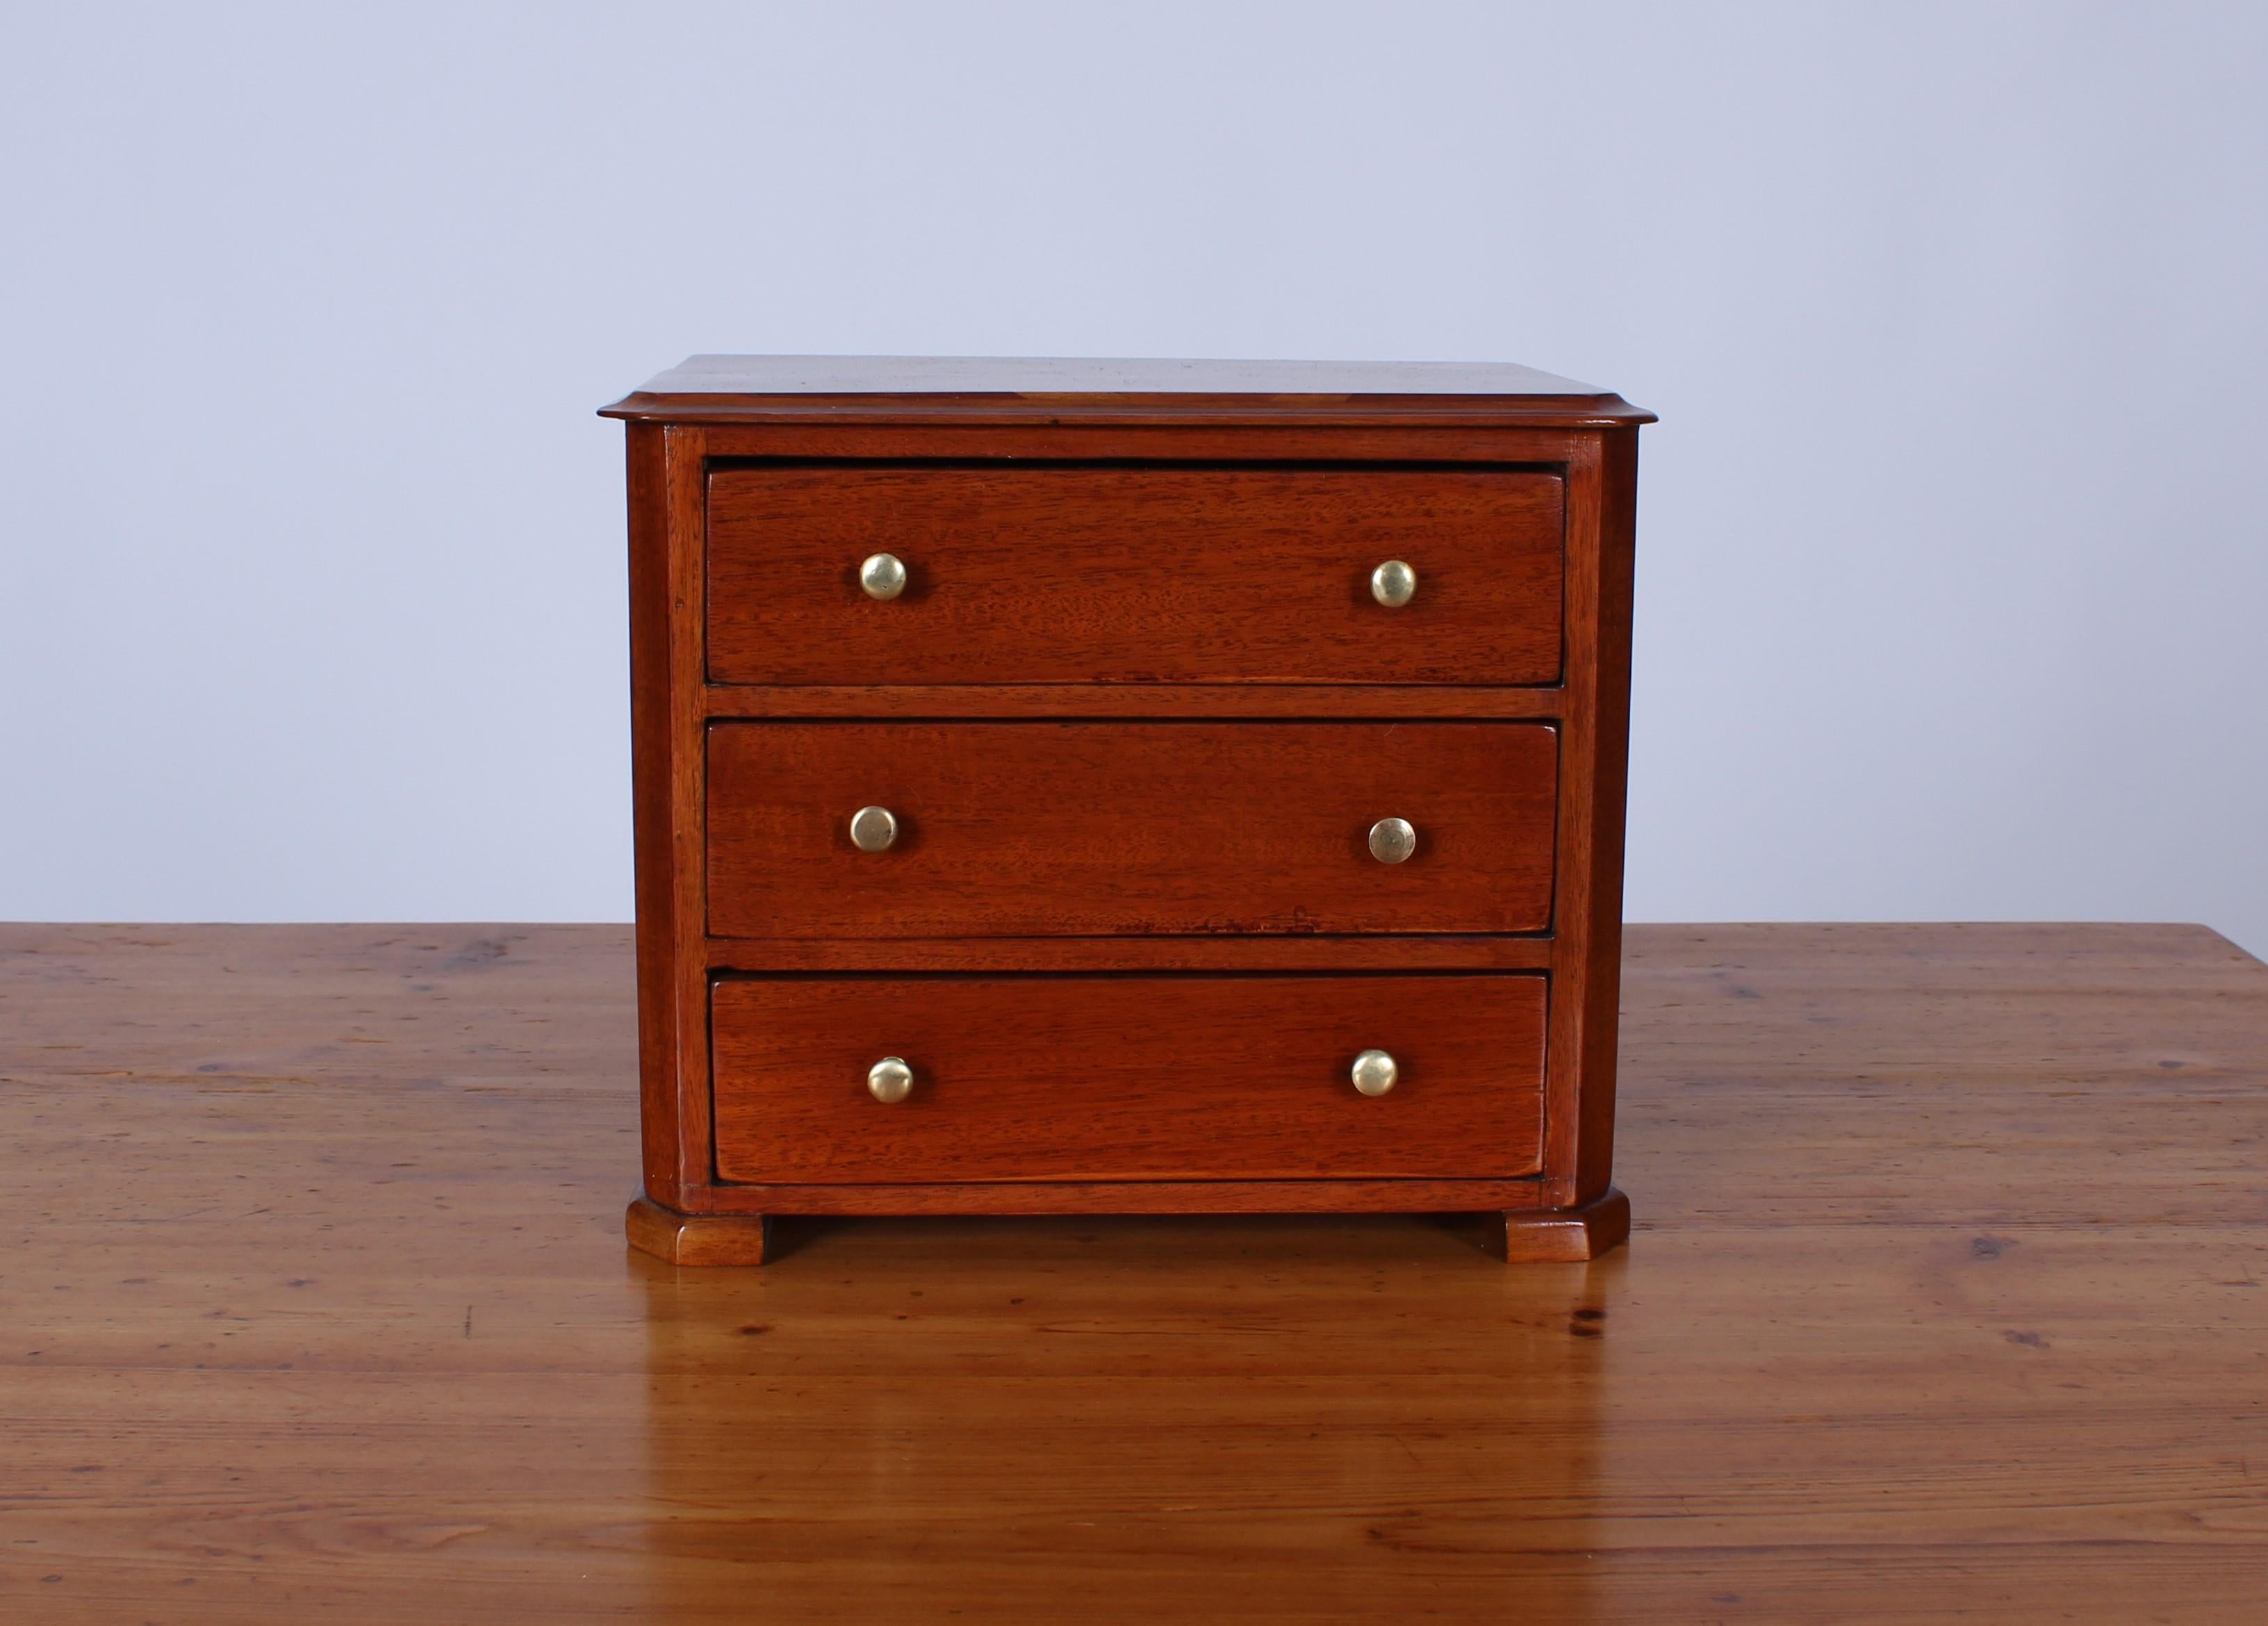 Small antique model chest of drawers from the 19th century.
Measures : Height circa 22 cm, width circa 25 cm.
Restored and polished shellac.